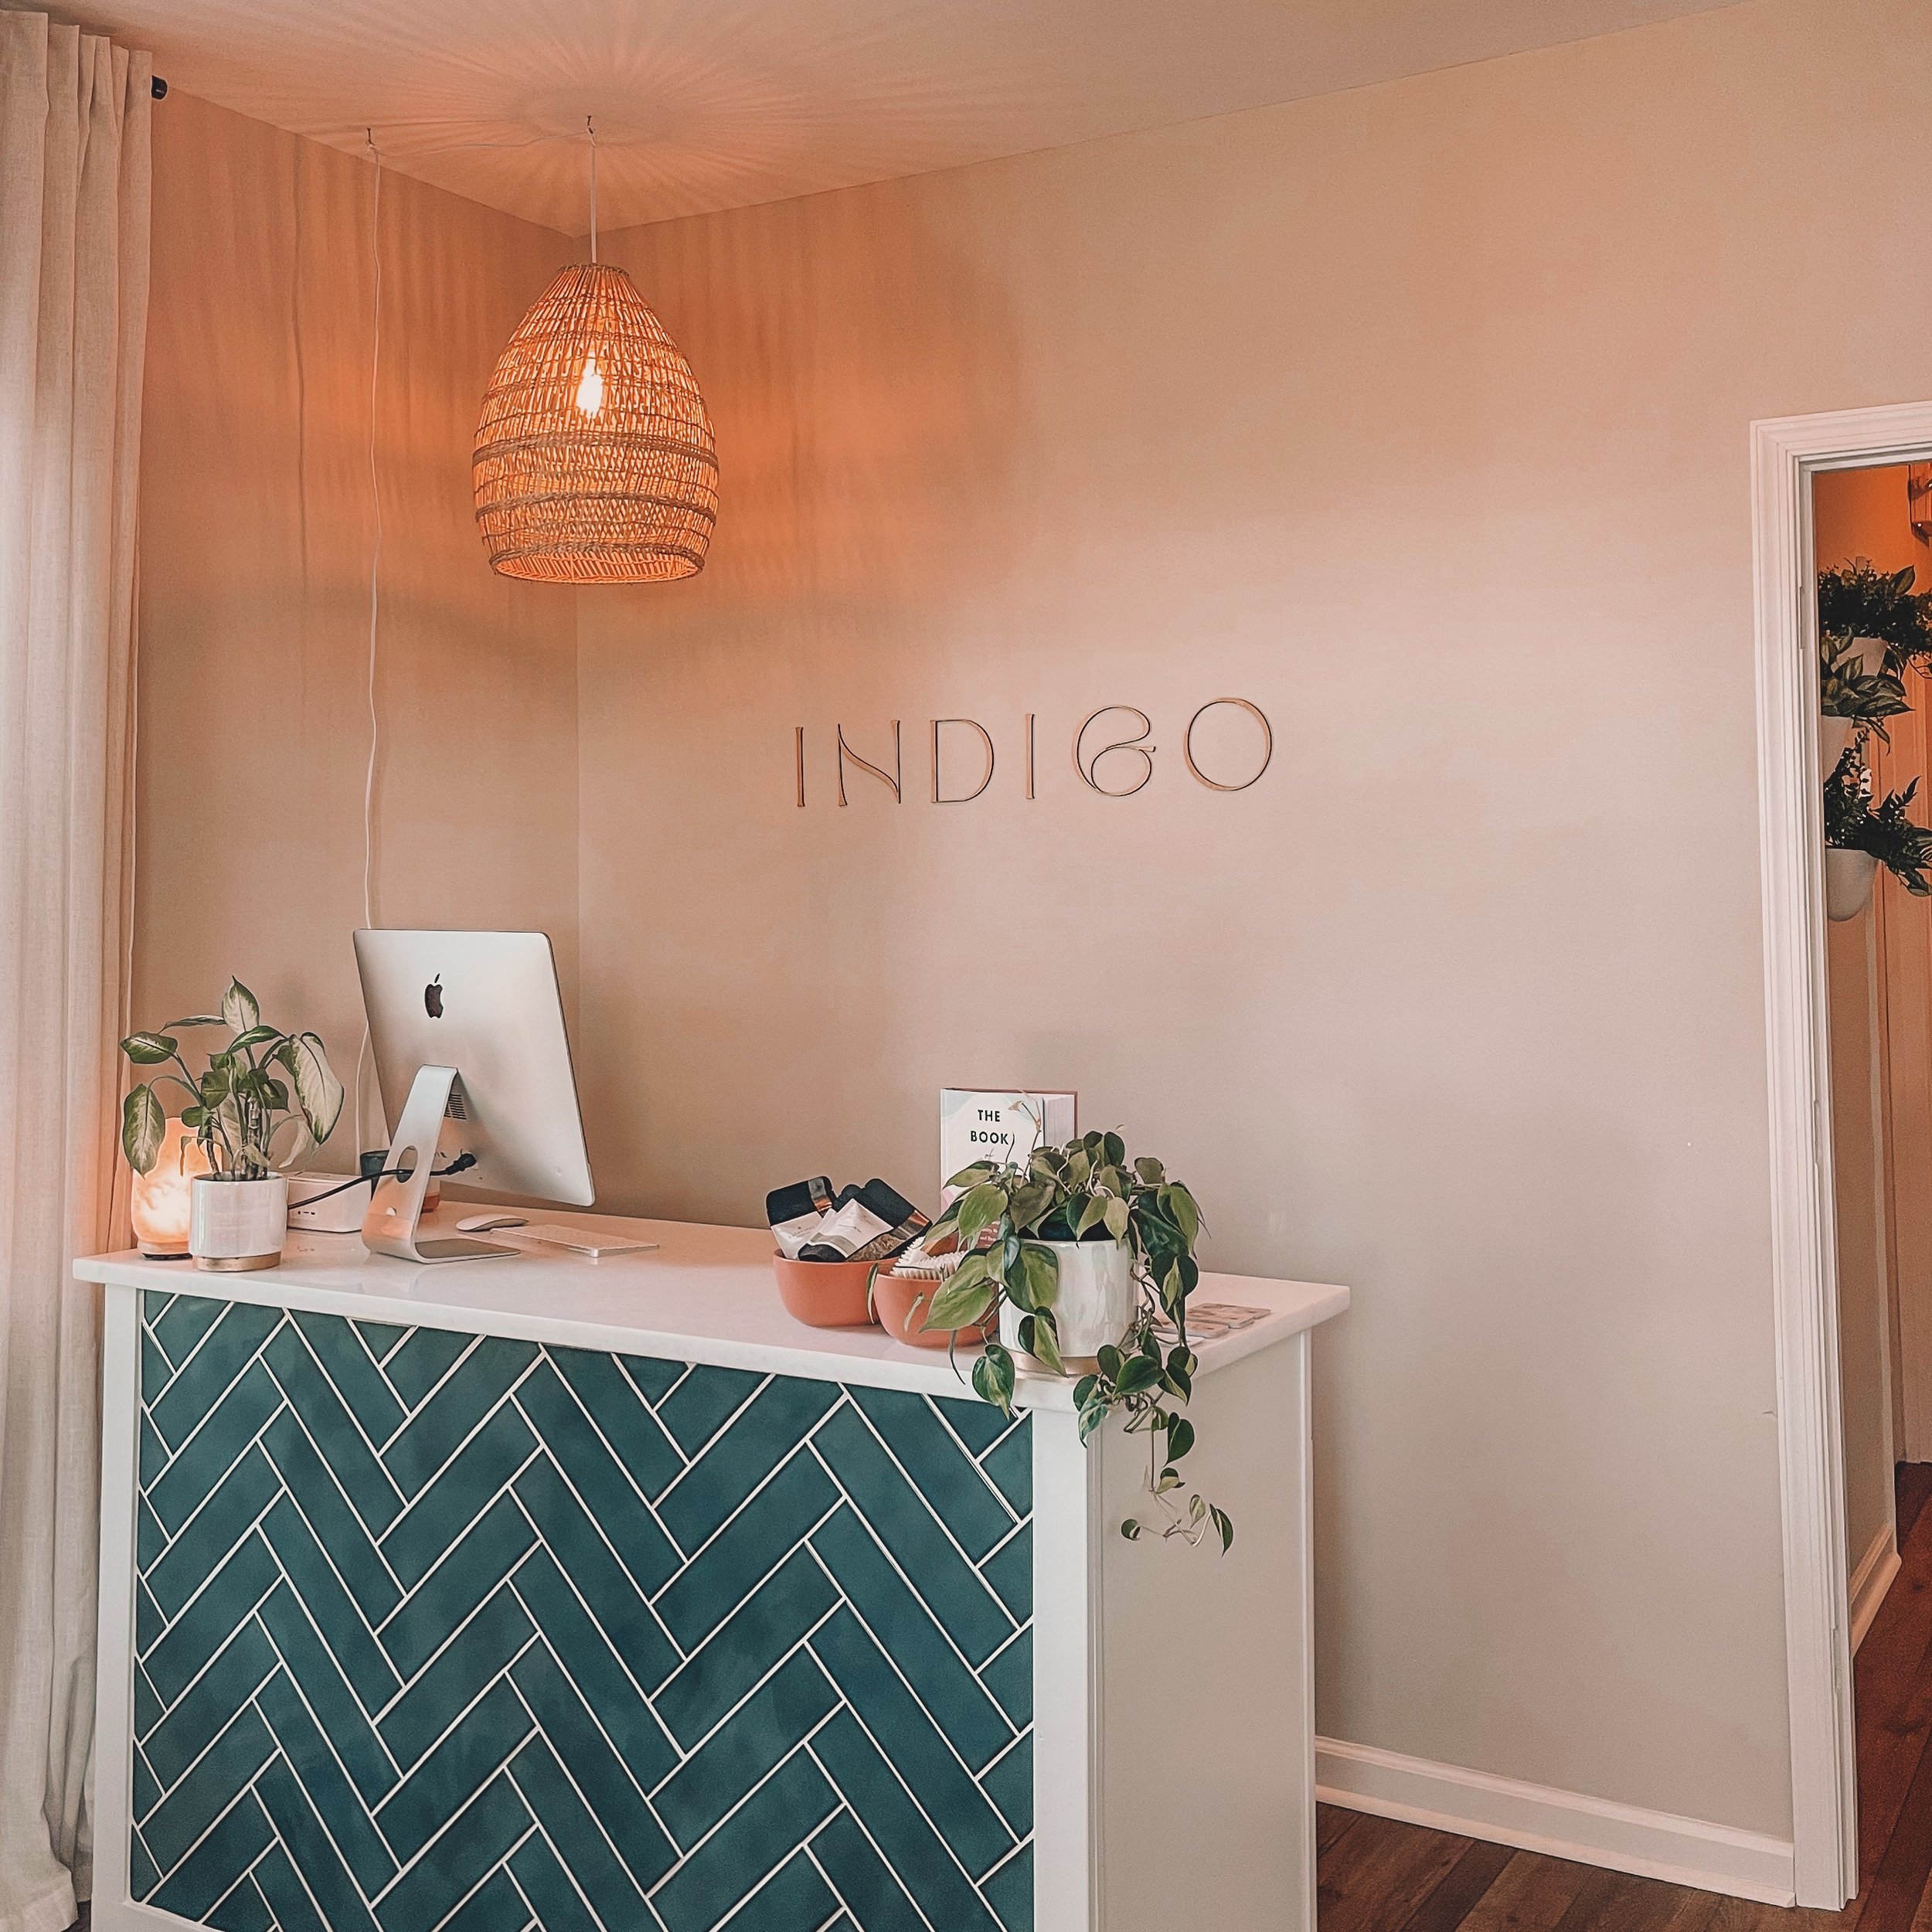 Welcome to our cozy little spa cottage! AKA your new favorite place for self care, relaxation and healing. 

It&rsquo;s a cute little space tucked away in sleepy Old Mechanicsville near the windmill🌬️ 

Book your first session and get $20 off this m